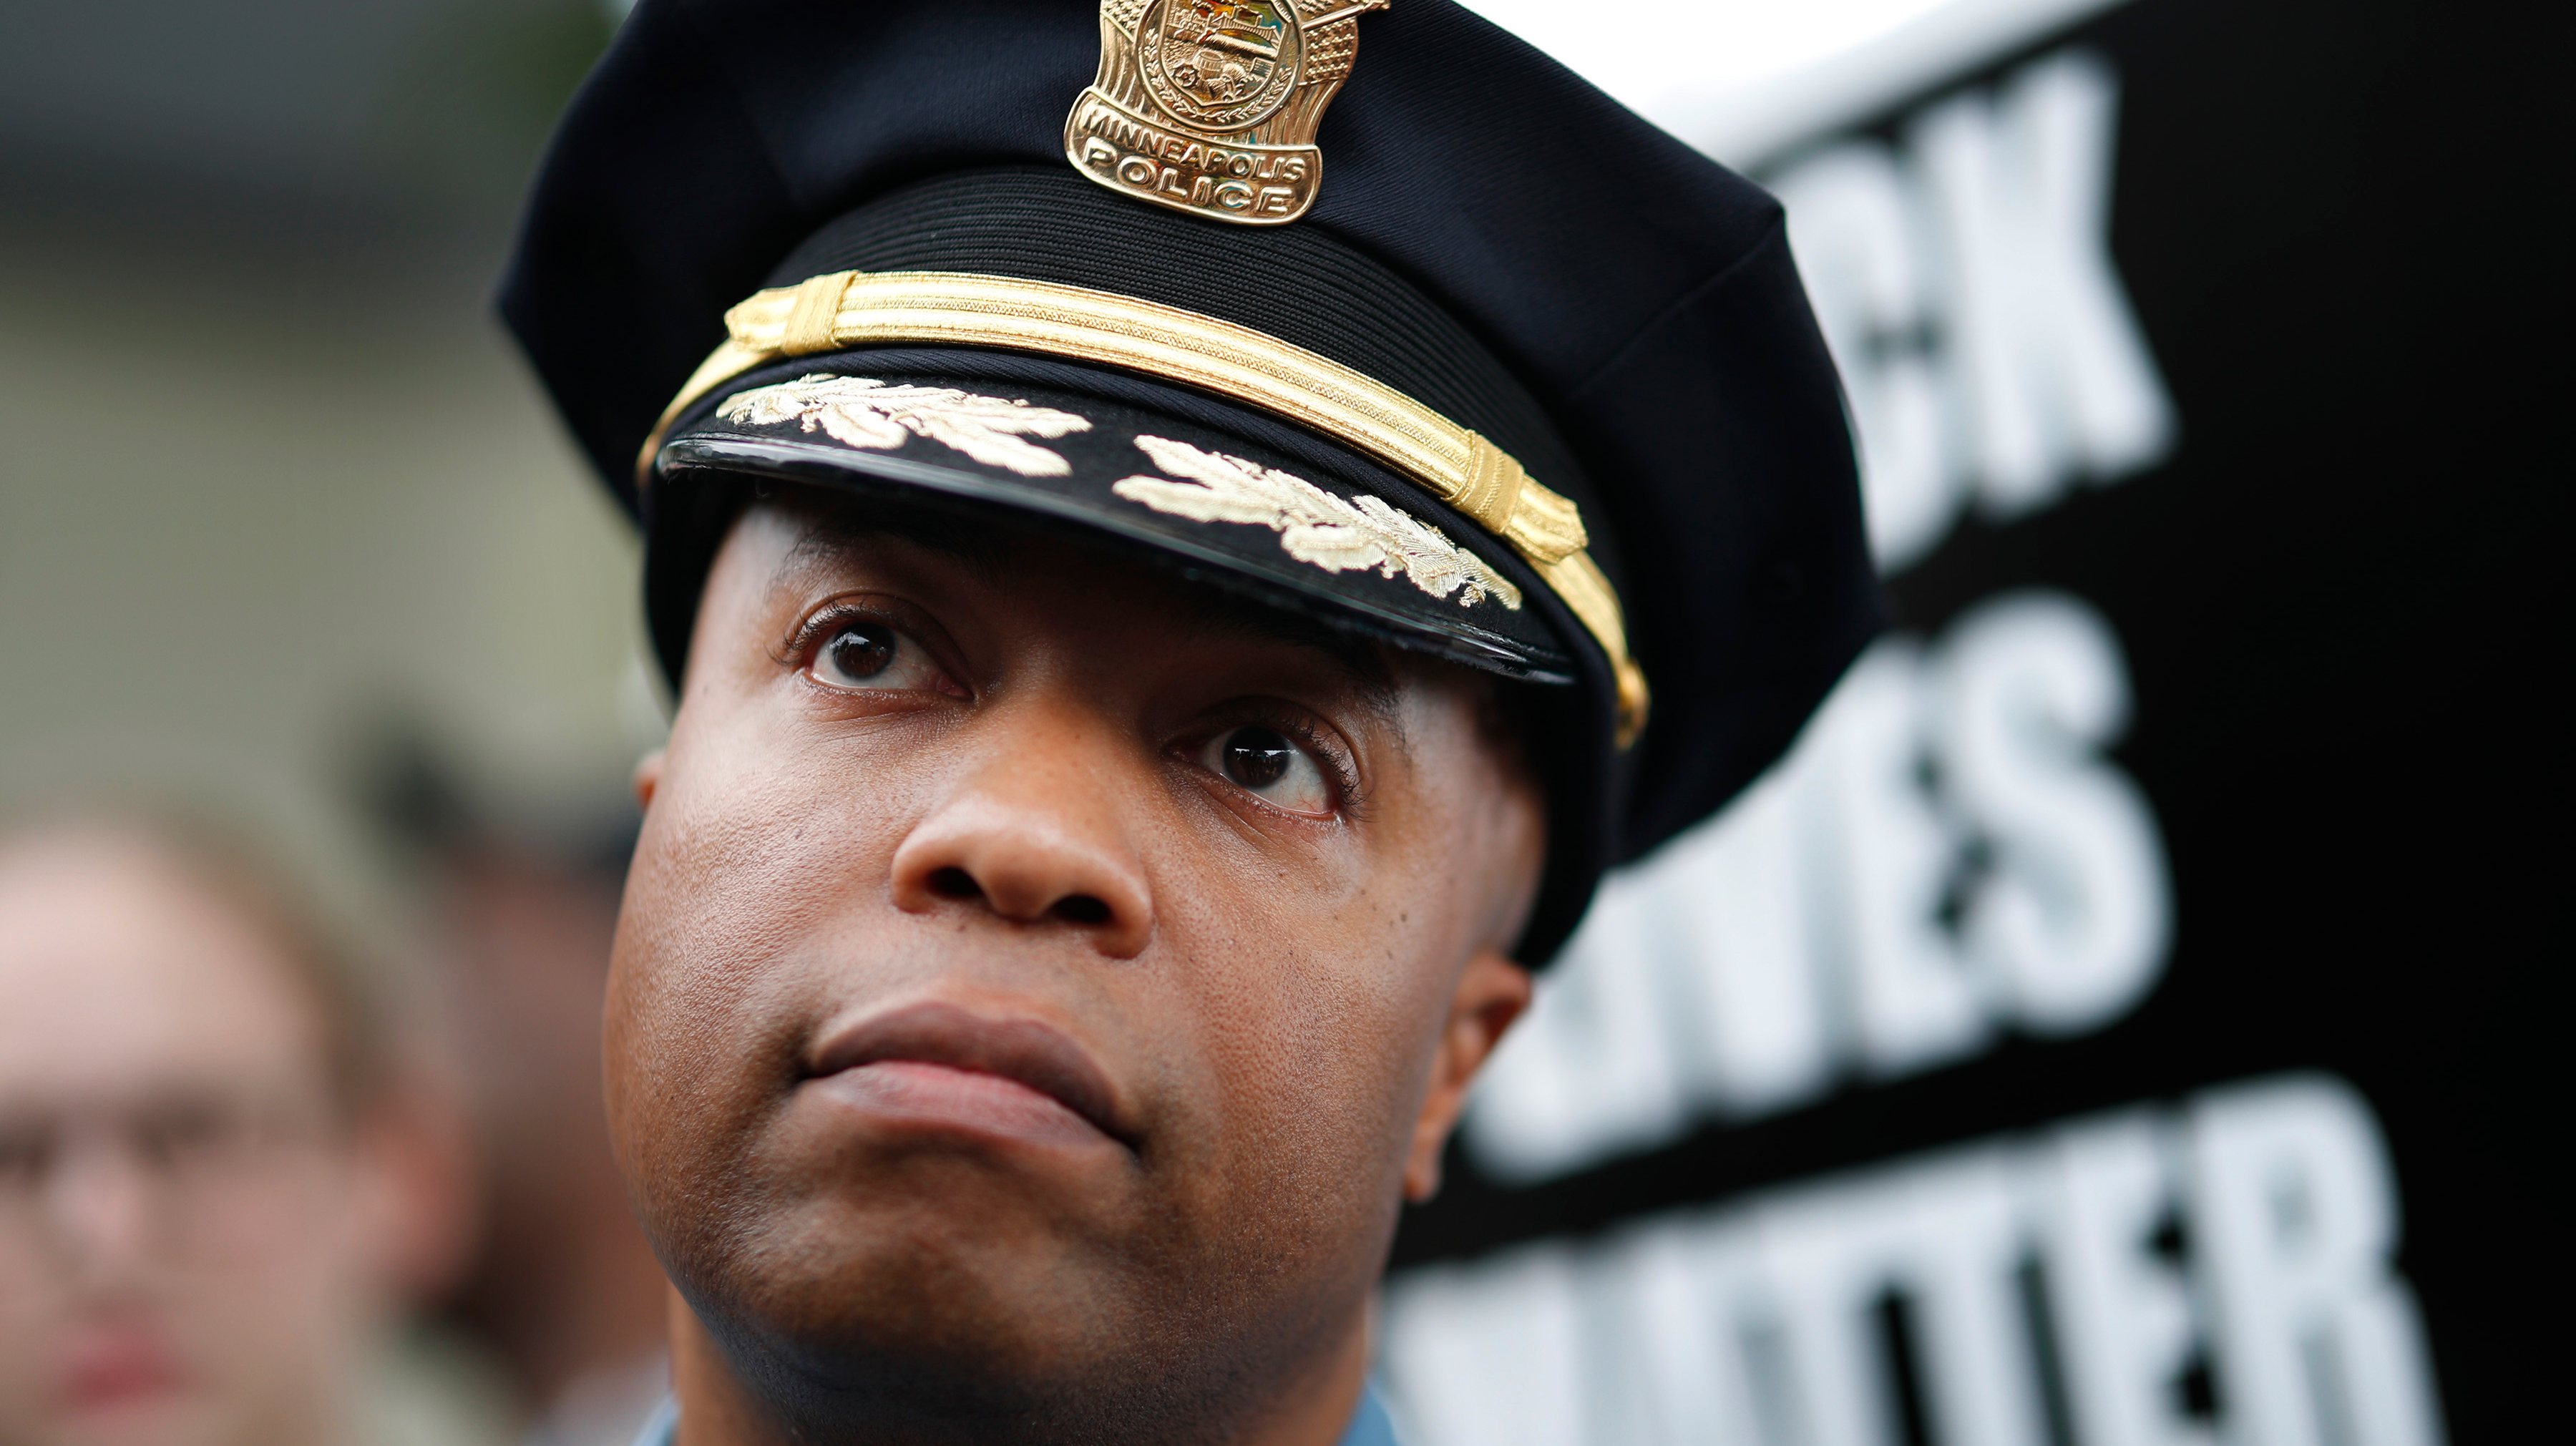 Minneapolis Police Chief Medaria Arradondo left, listened as north side community members held a protest and rally at the 4th precinct on Plymouth avenue in response to the shooting death of Thurman Blevins by Minneapolis Police  Sunday June 24, 2018 in M